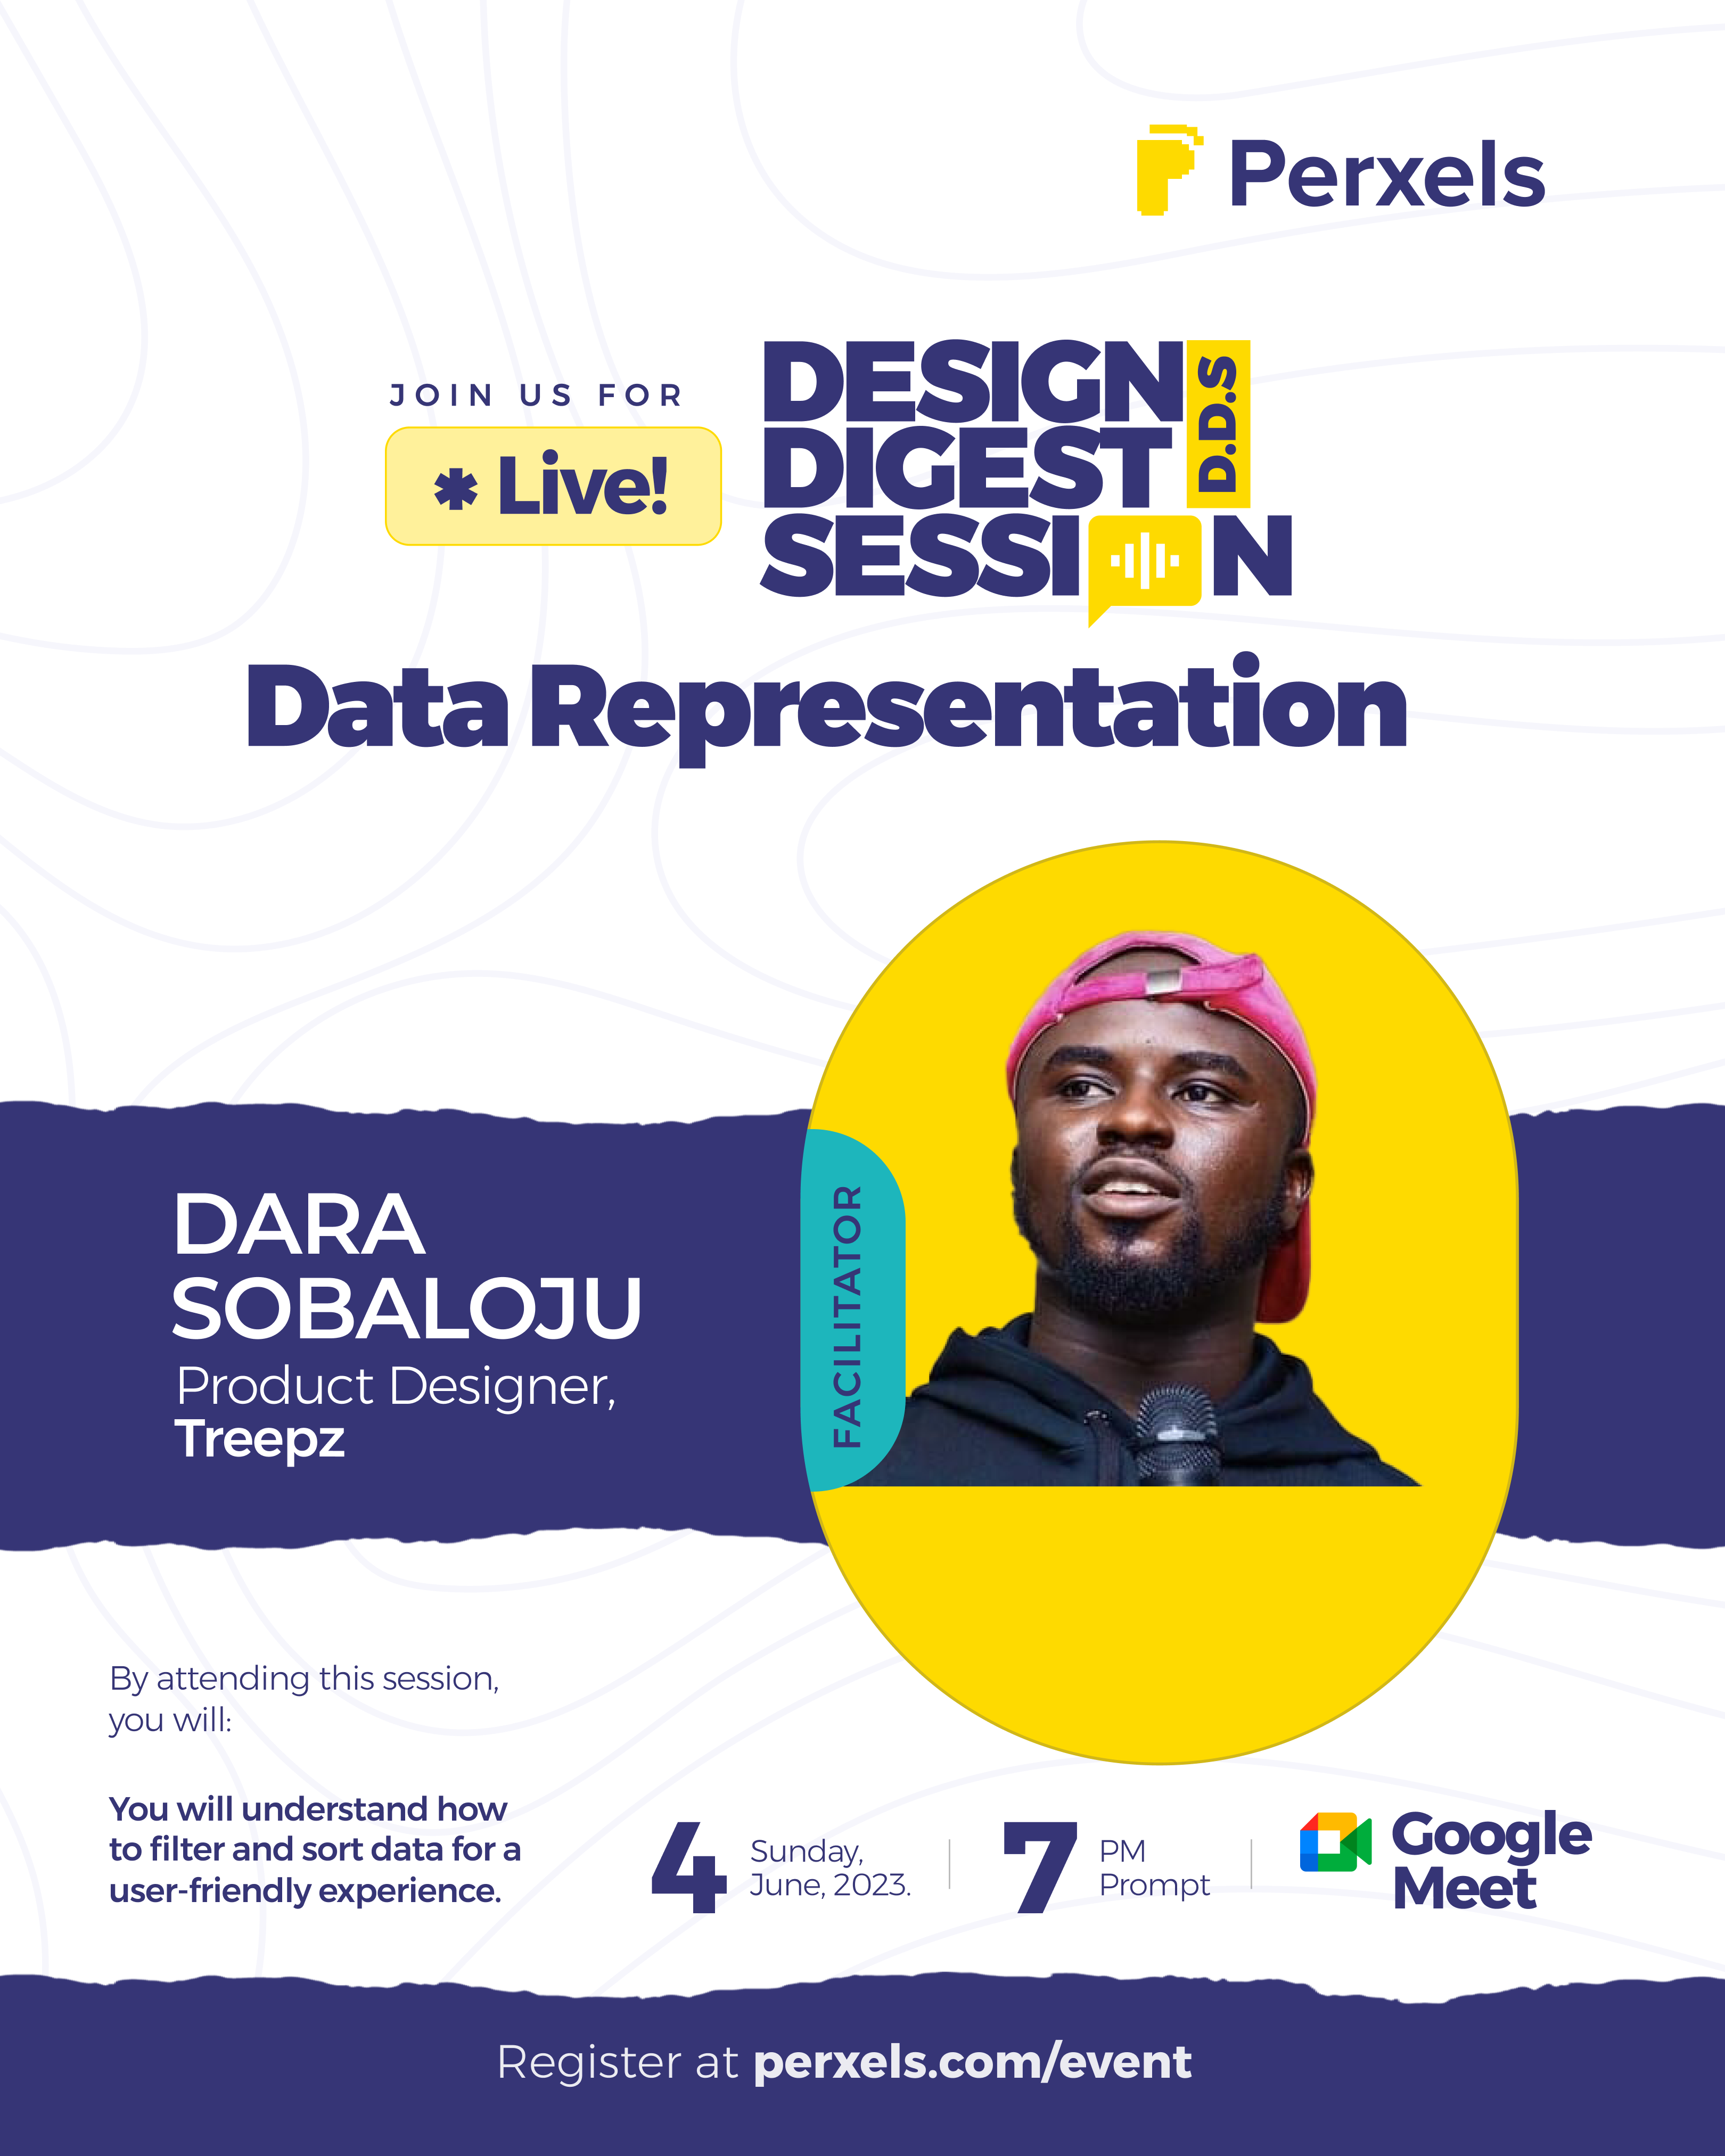 Live Design Session Post free event in Nigeria using tickethub.ng, buy and sell tickets to event